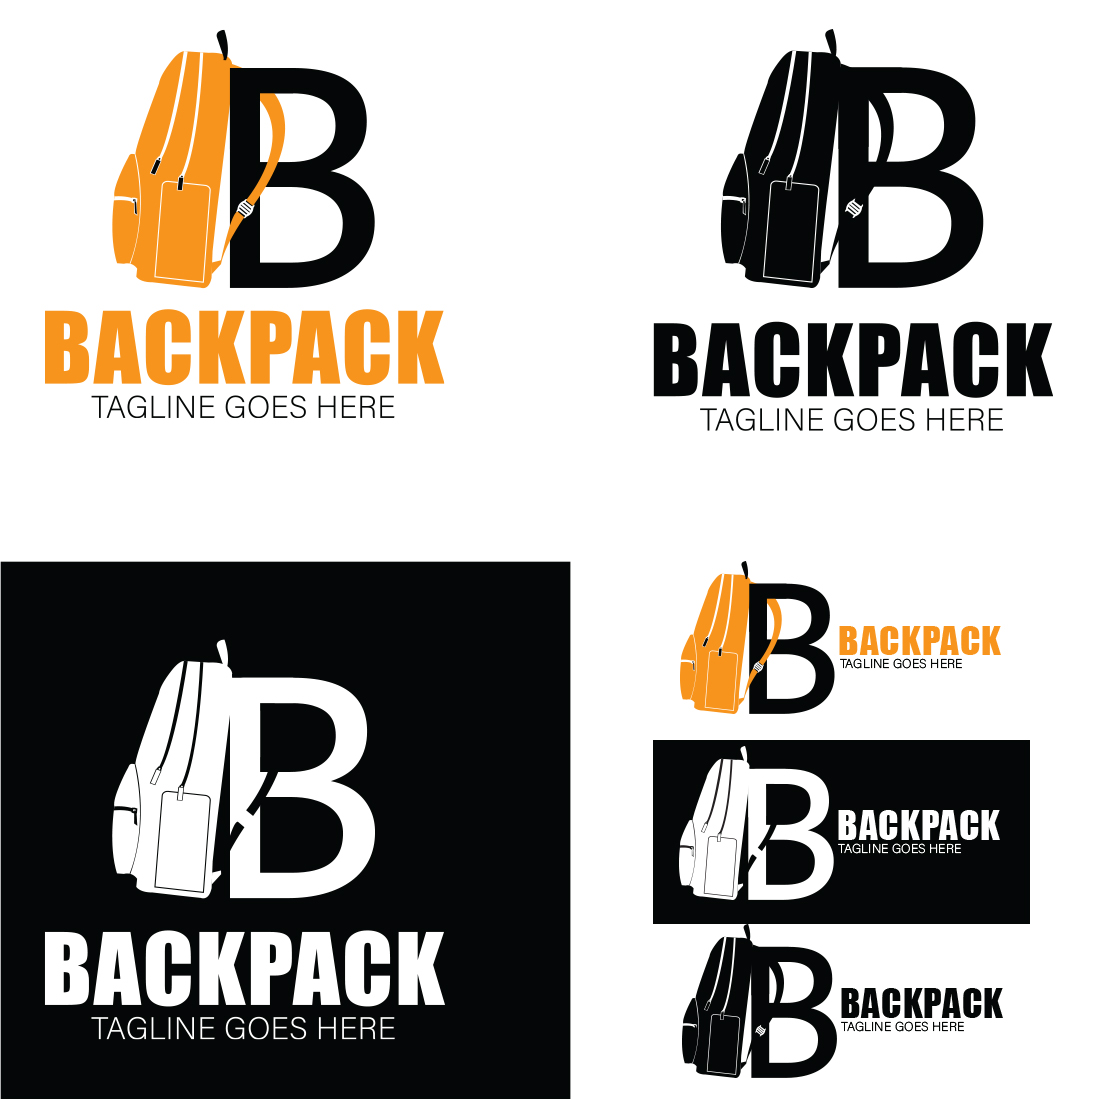 Stylish Backpack Logo Template cover image.